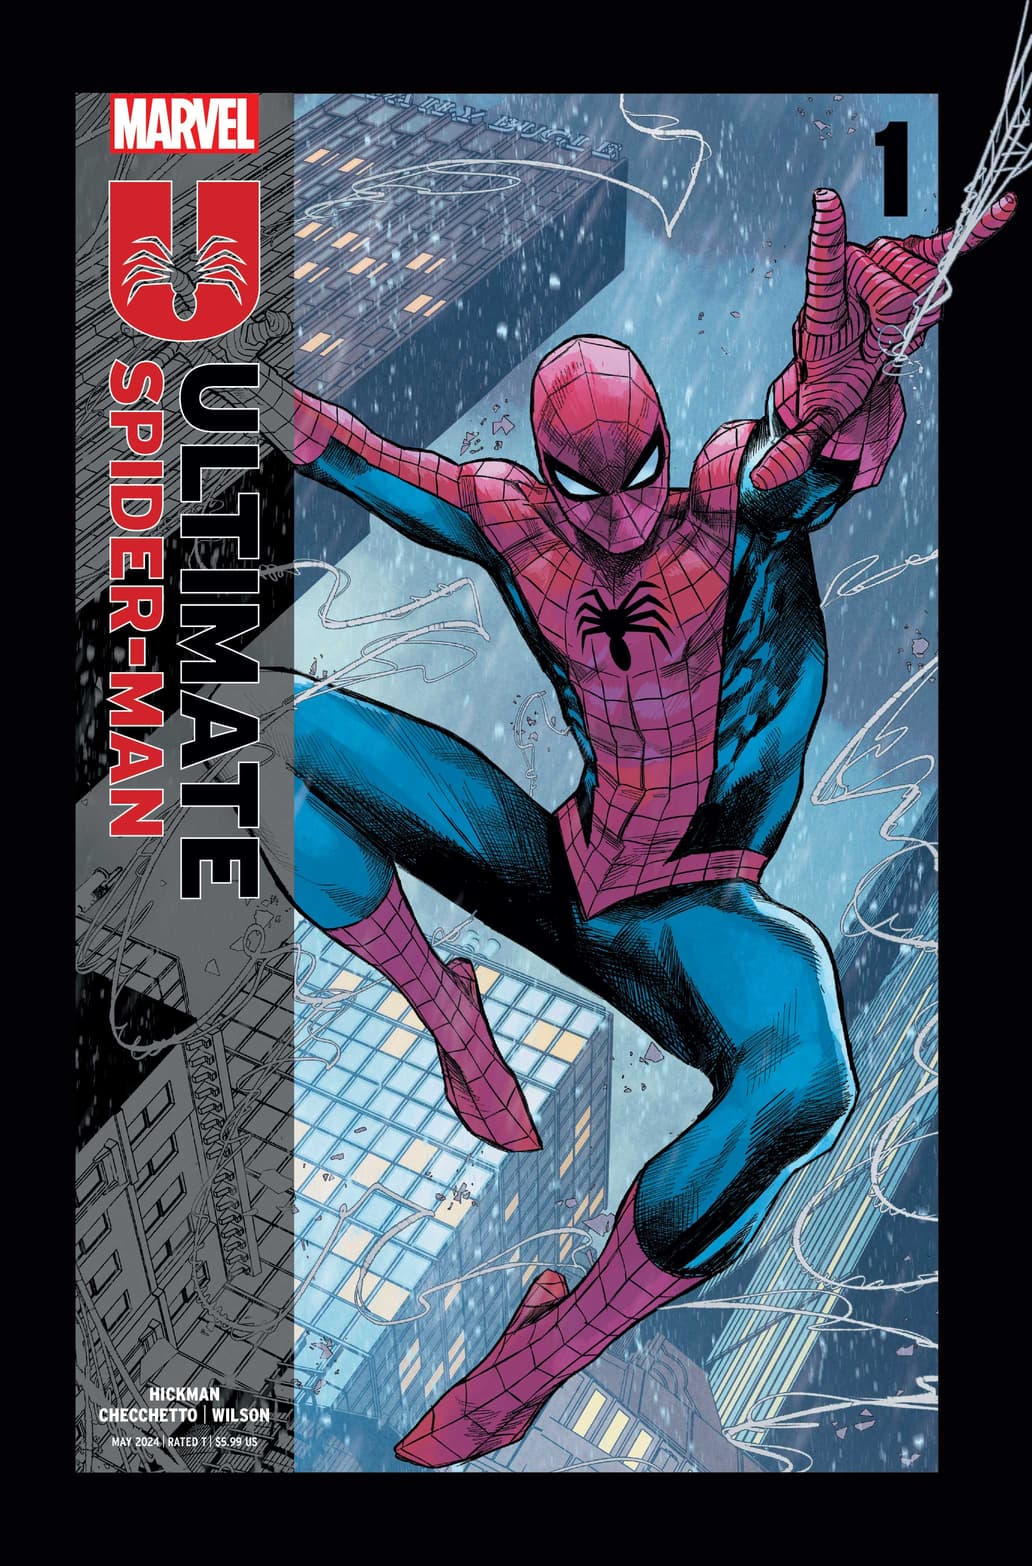 ULTIMATE SPIDER-MAN #1 FIFTH PRINTING cover by Marco Checchetto